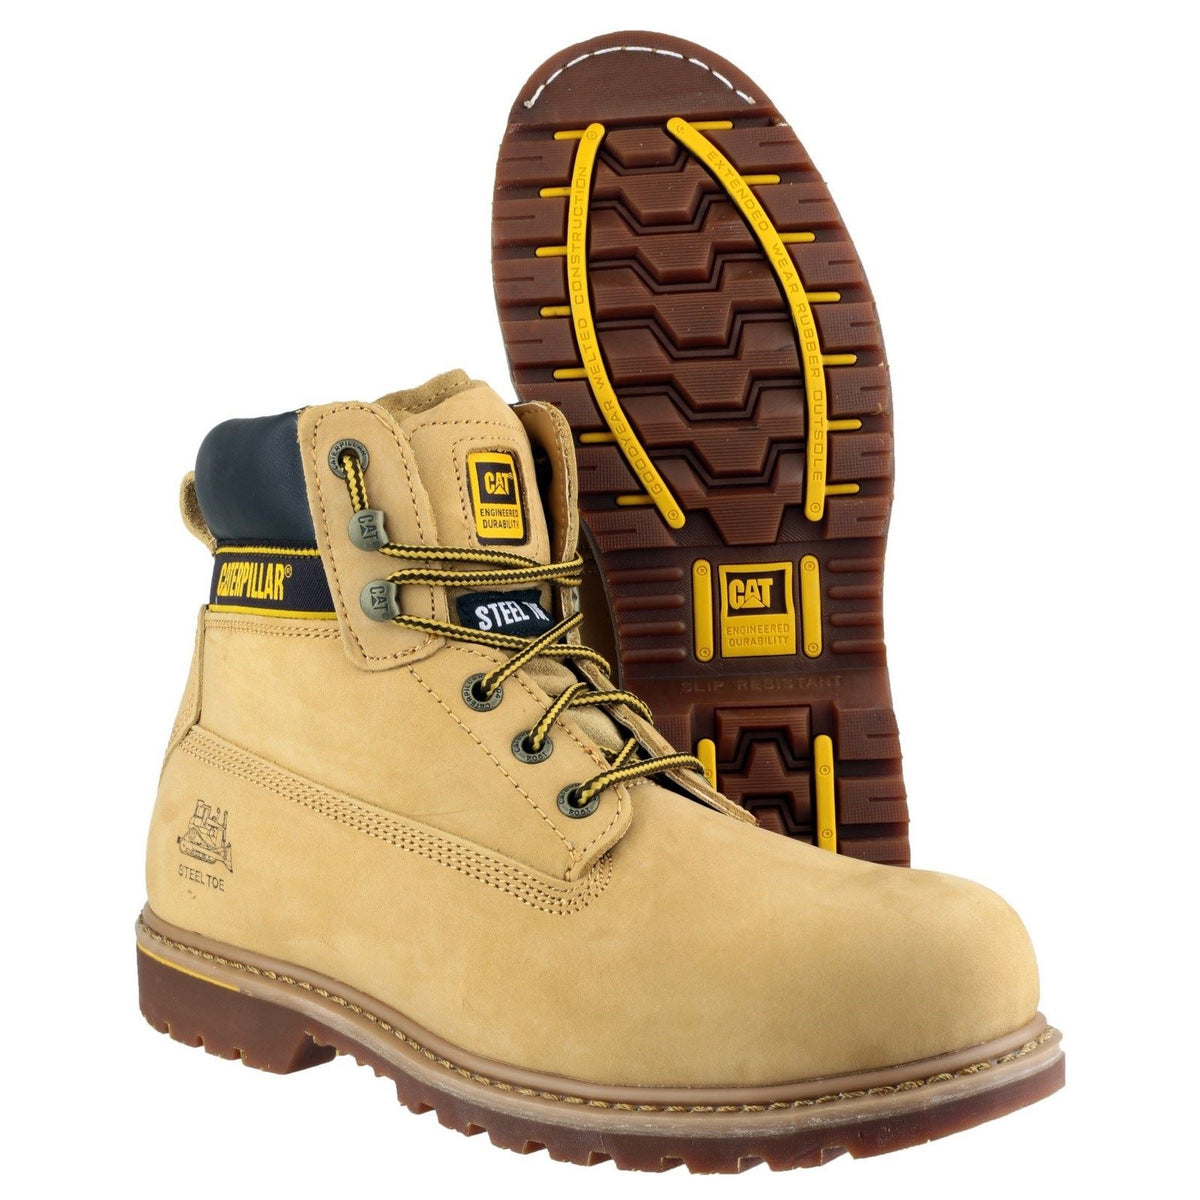 Caterpillar Holton SB Safety Boots